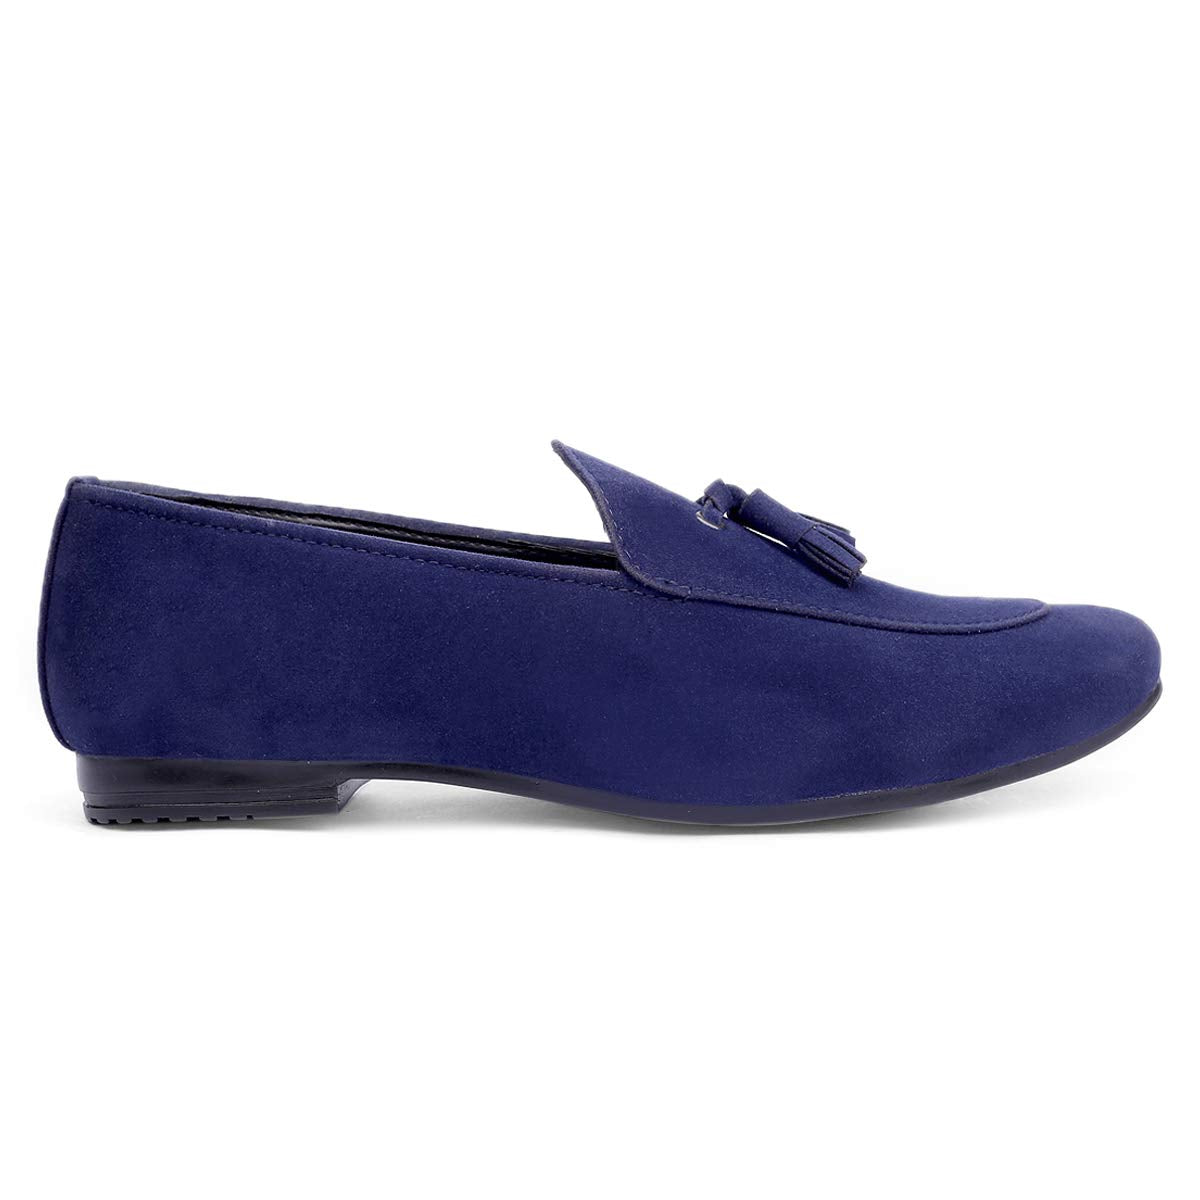 Basic Pattern Classic Casual Suede Material Loafer & Moccasins Shoe For Men-Unique and Classy